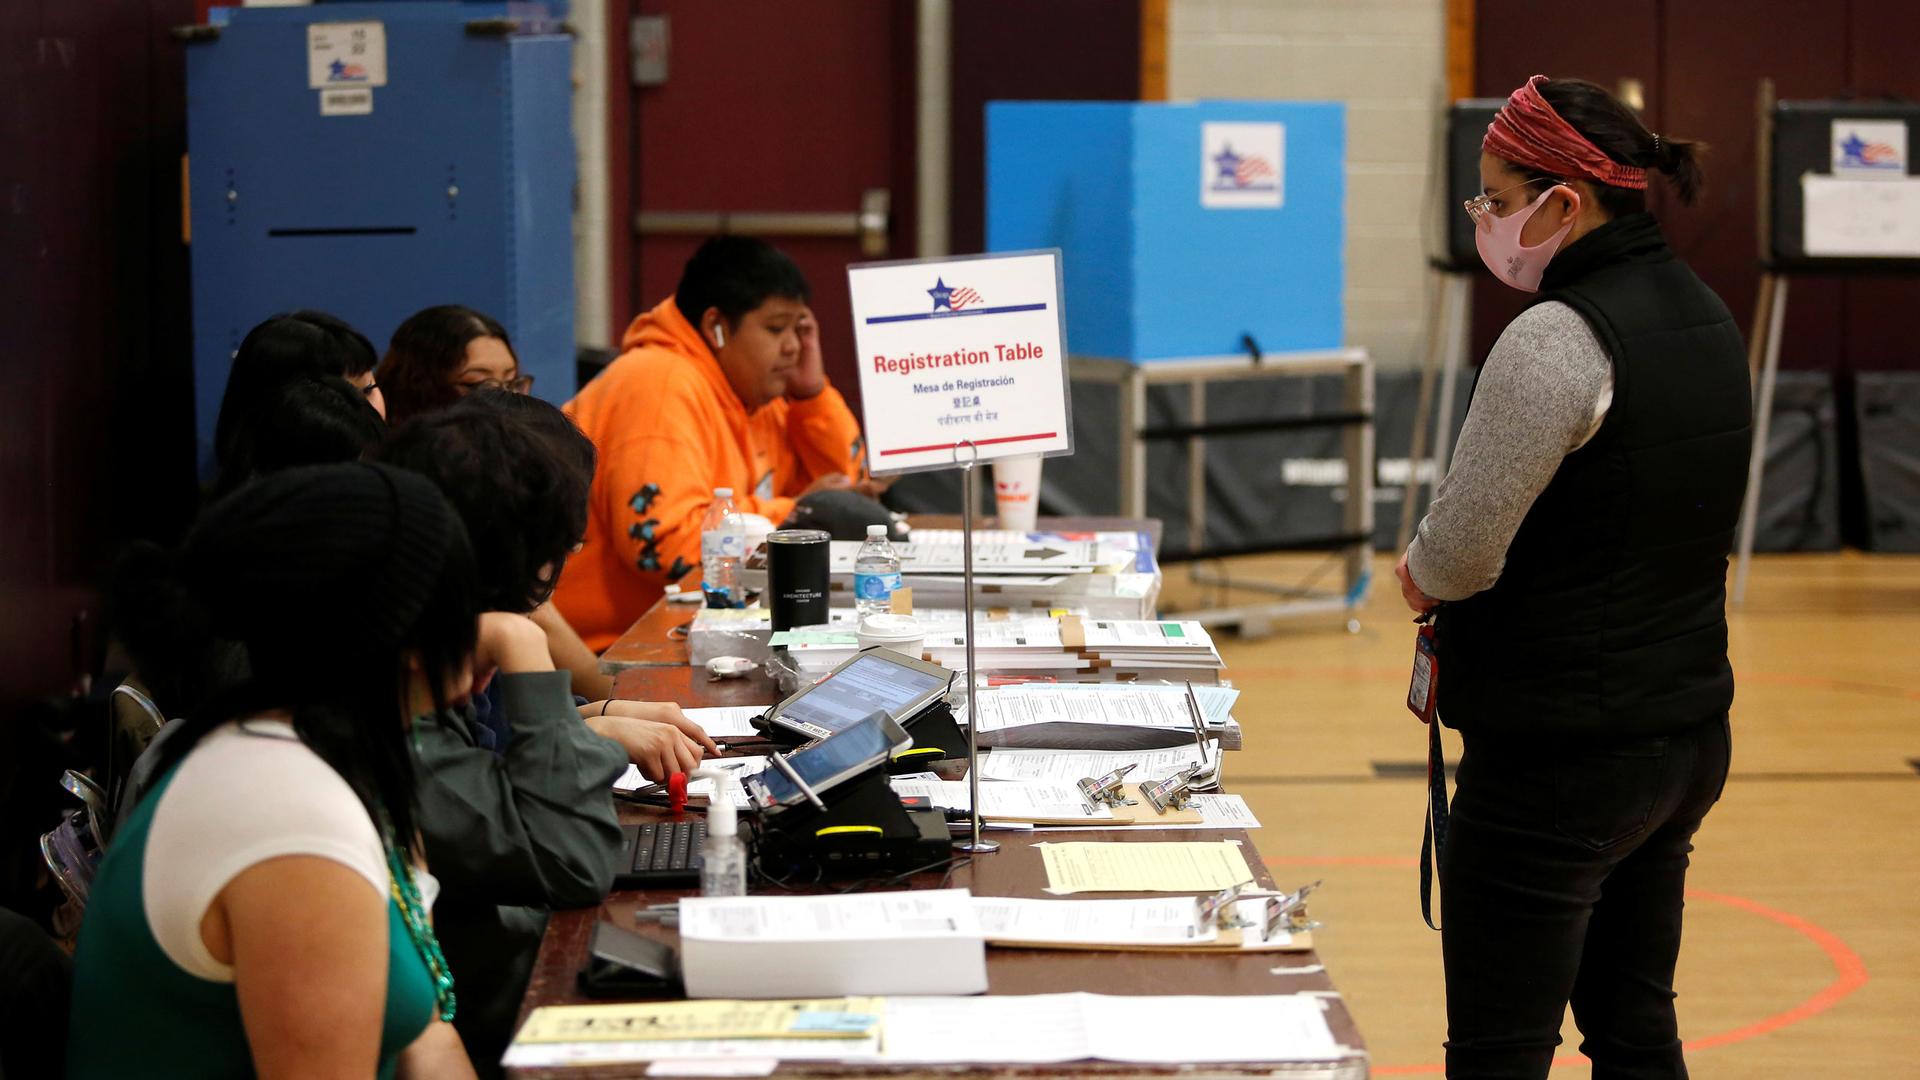 A voter stands at the registration table before receiving their ballot during the Democratic presidential primary election at Madero Middle School in Chicago, Illinois, March 17, 2020.